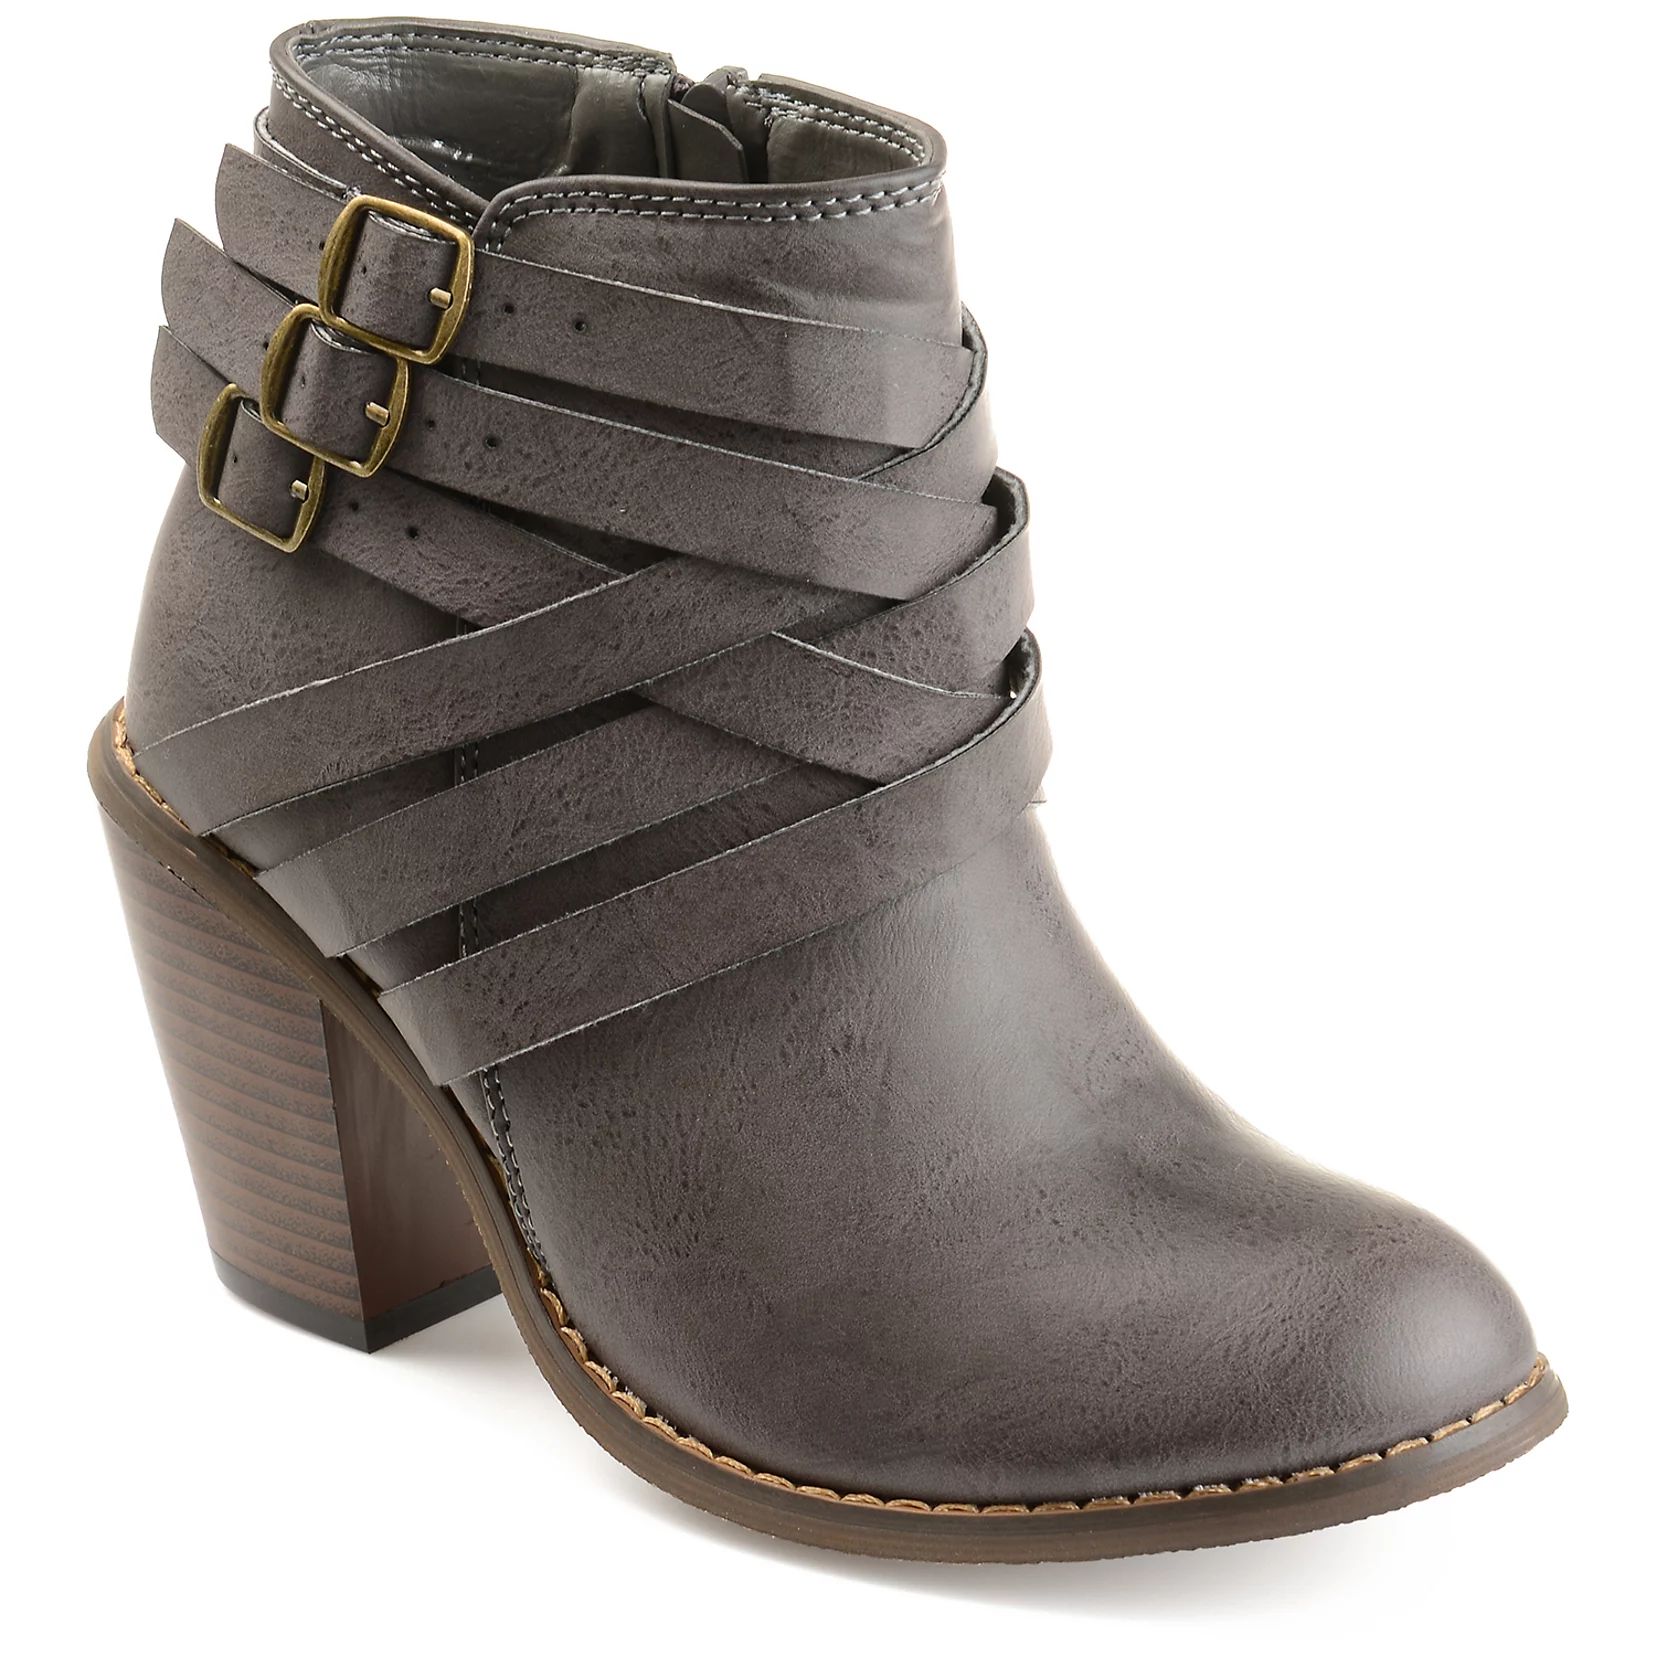 Journee Collection Strap Women's Ankle Boots | Kohl's